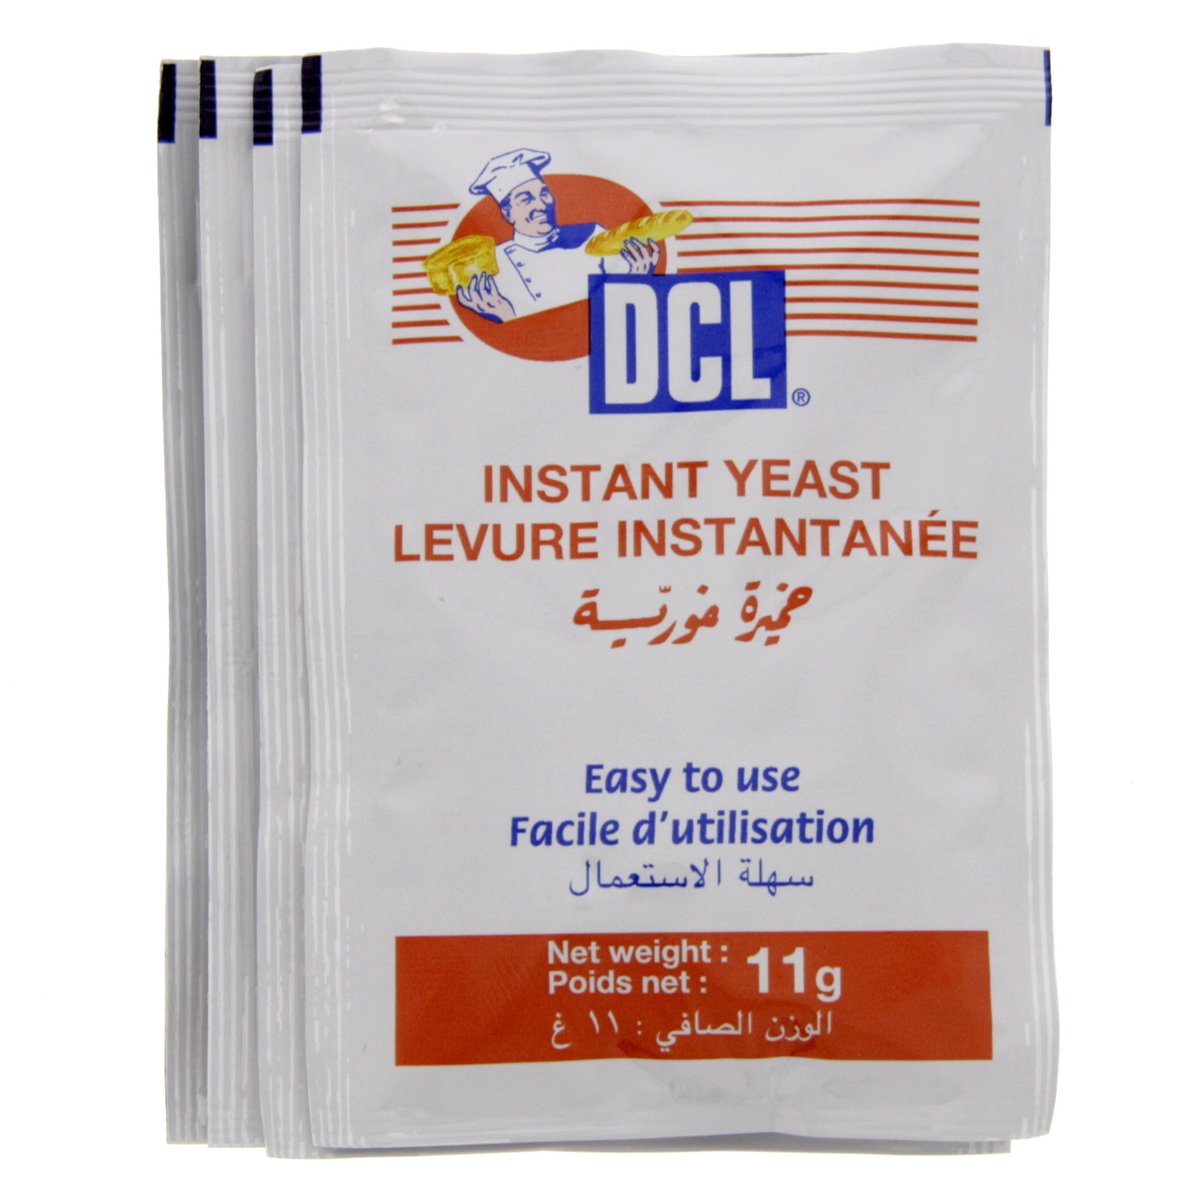 DCL Instant Yeast 4 x 11 g